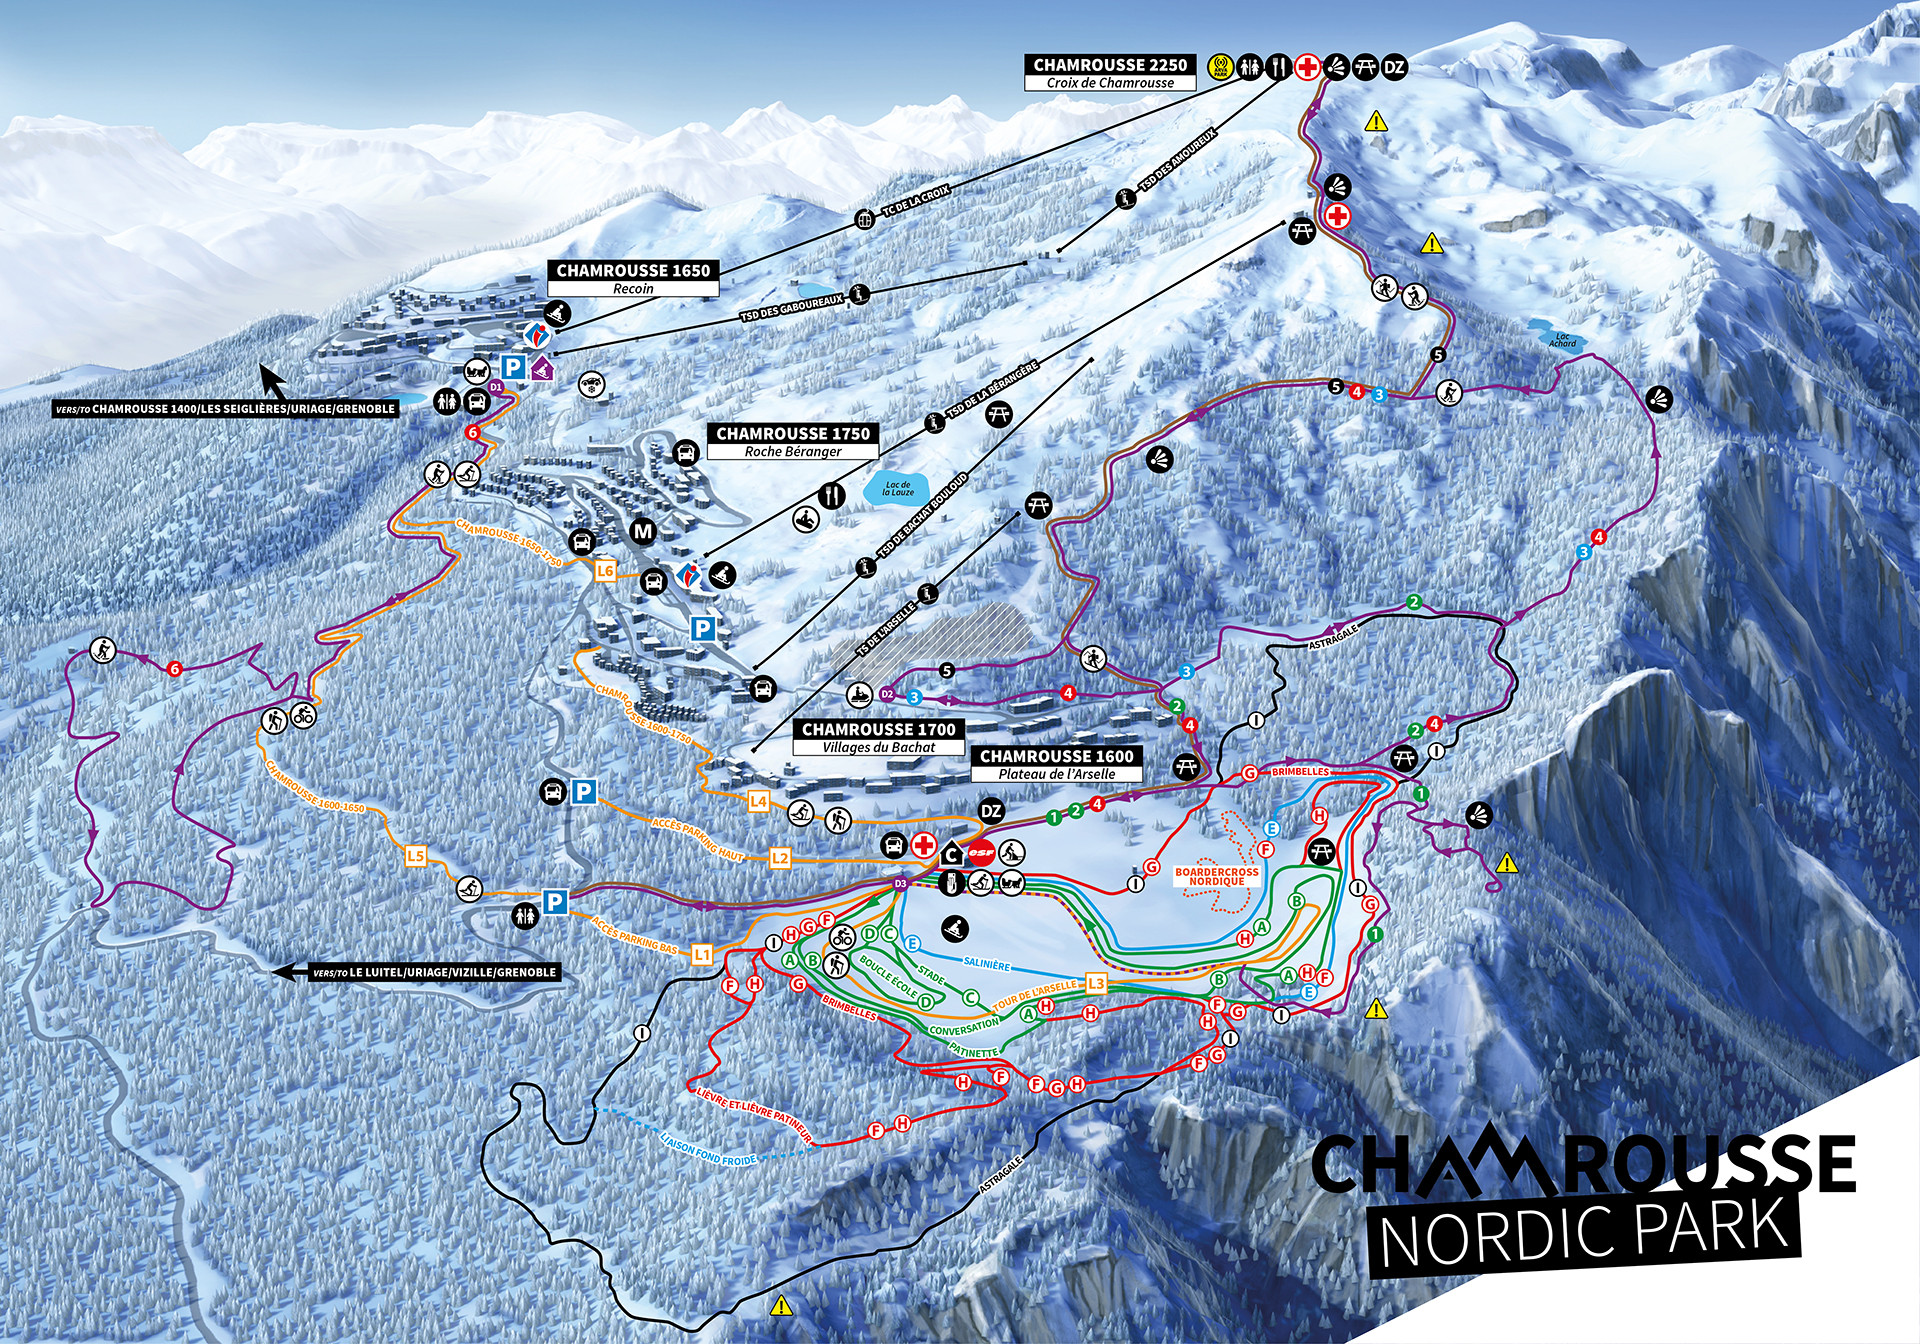 Chamrousse Nordic Park nordic ski map cross-country skiing classic and skating slopes winter 2023 mountain resort grenoble isere french alps france